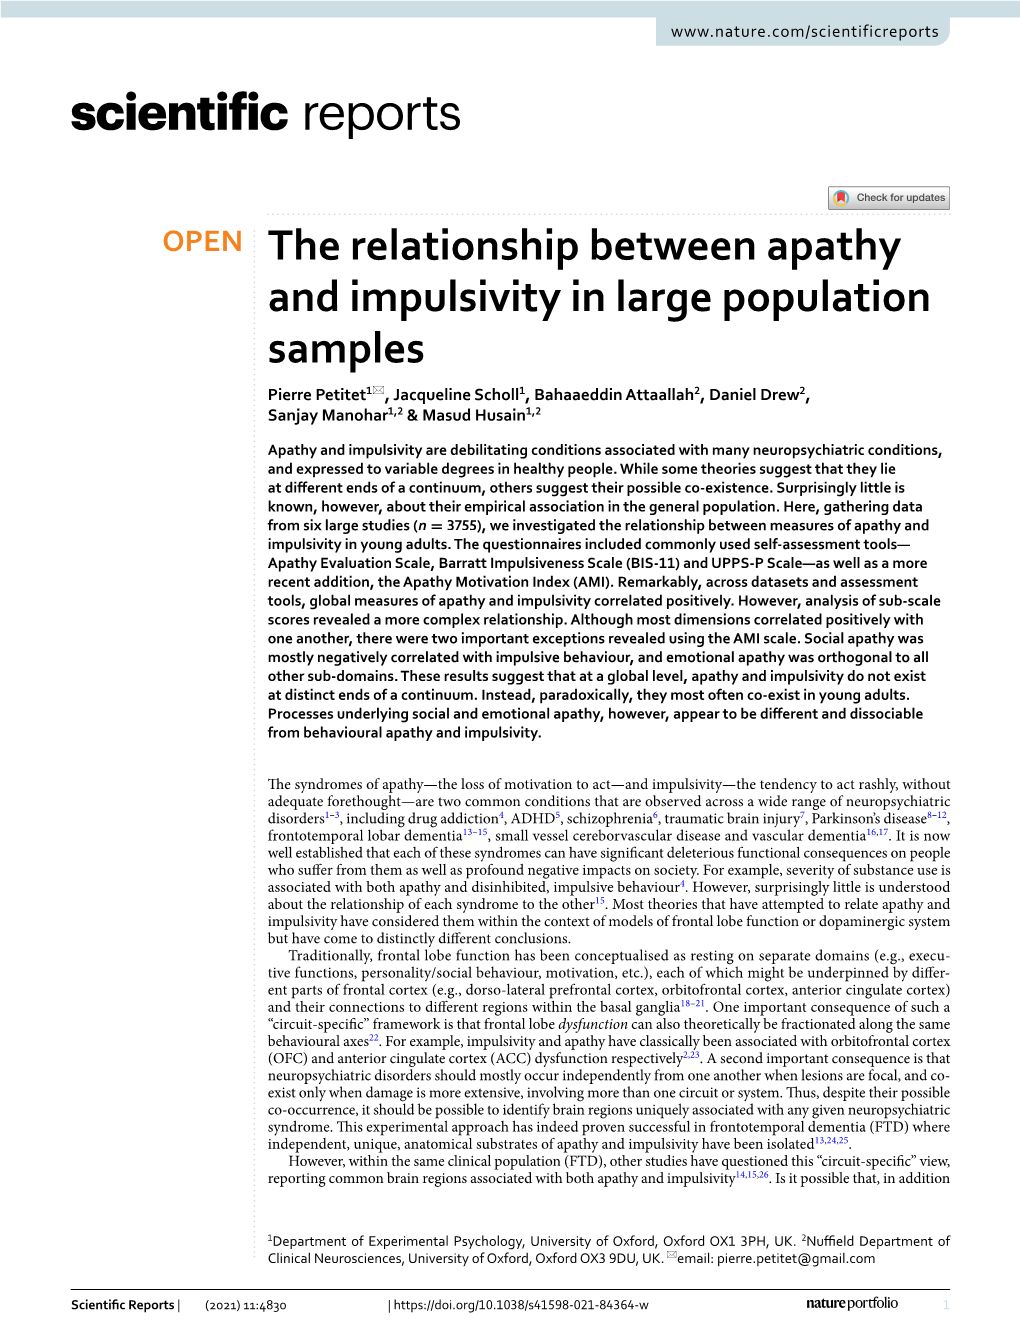 The Relationship Between Apathy and Impulsivity in Large Population